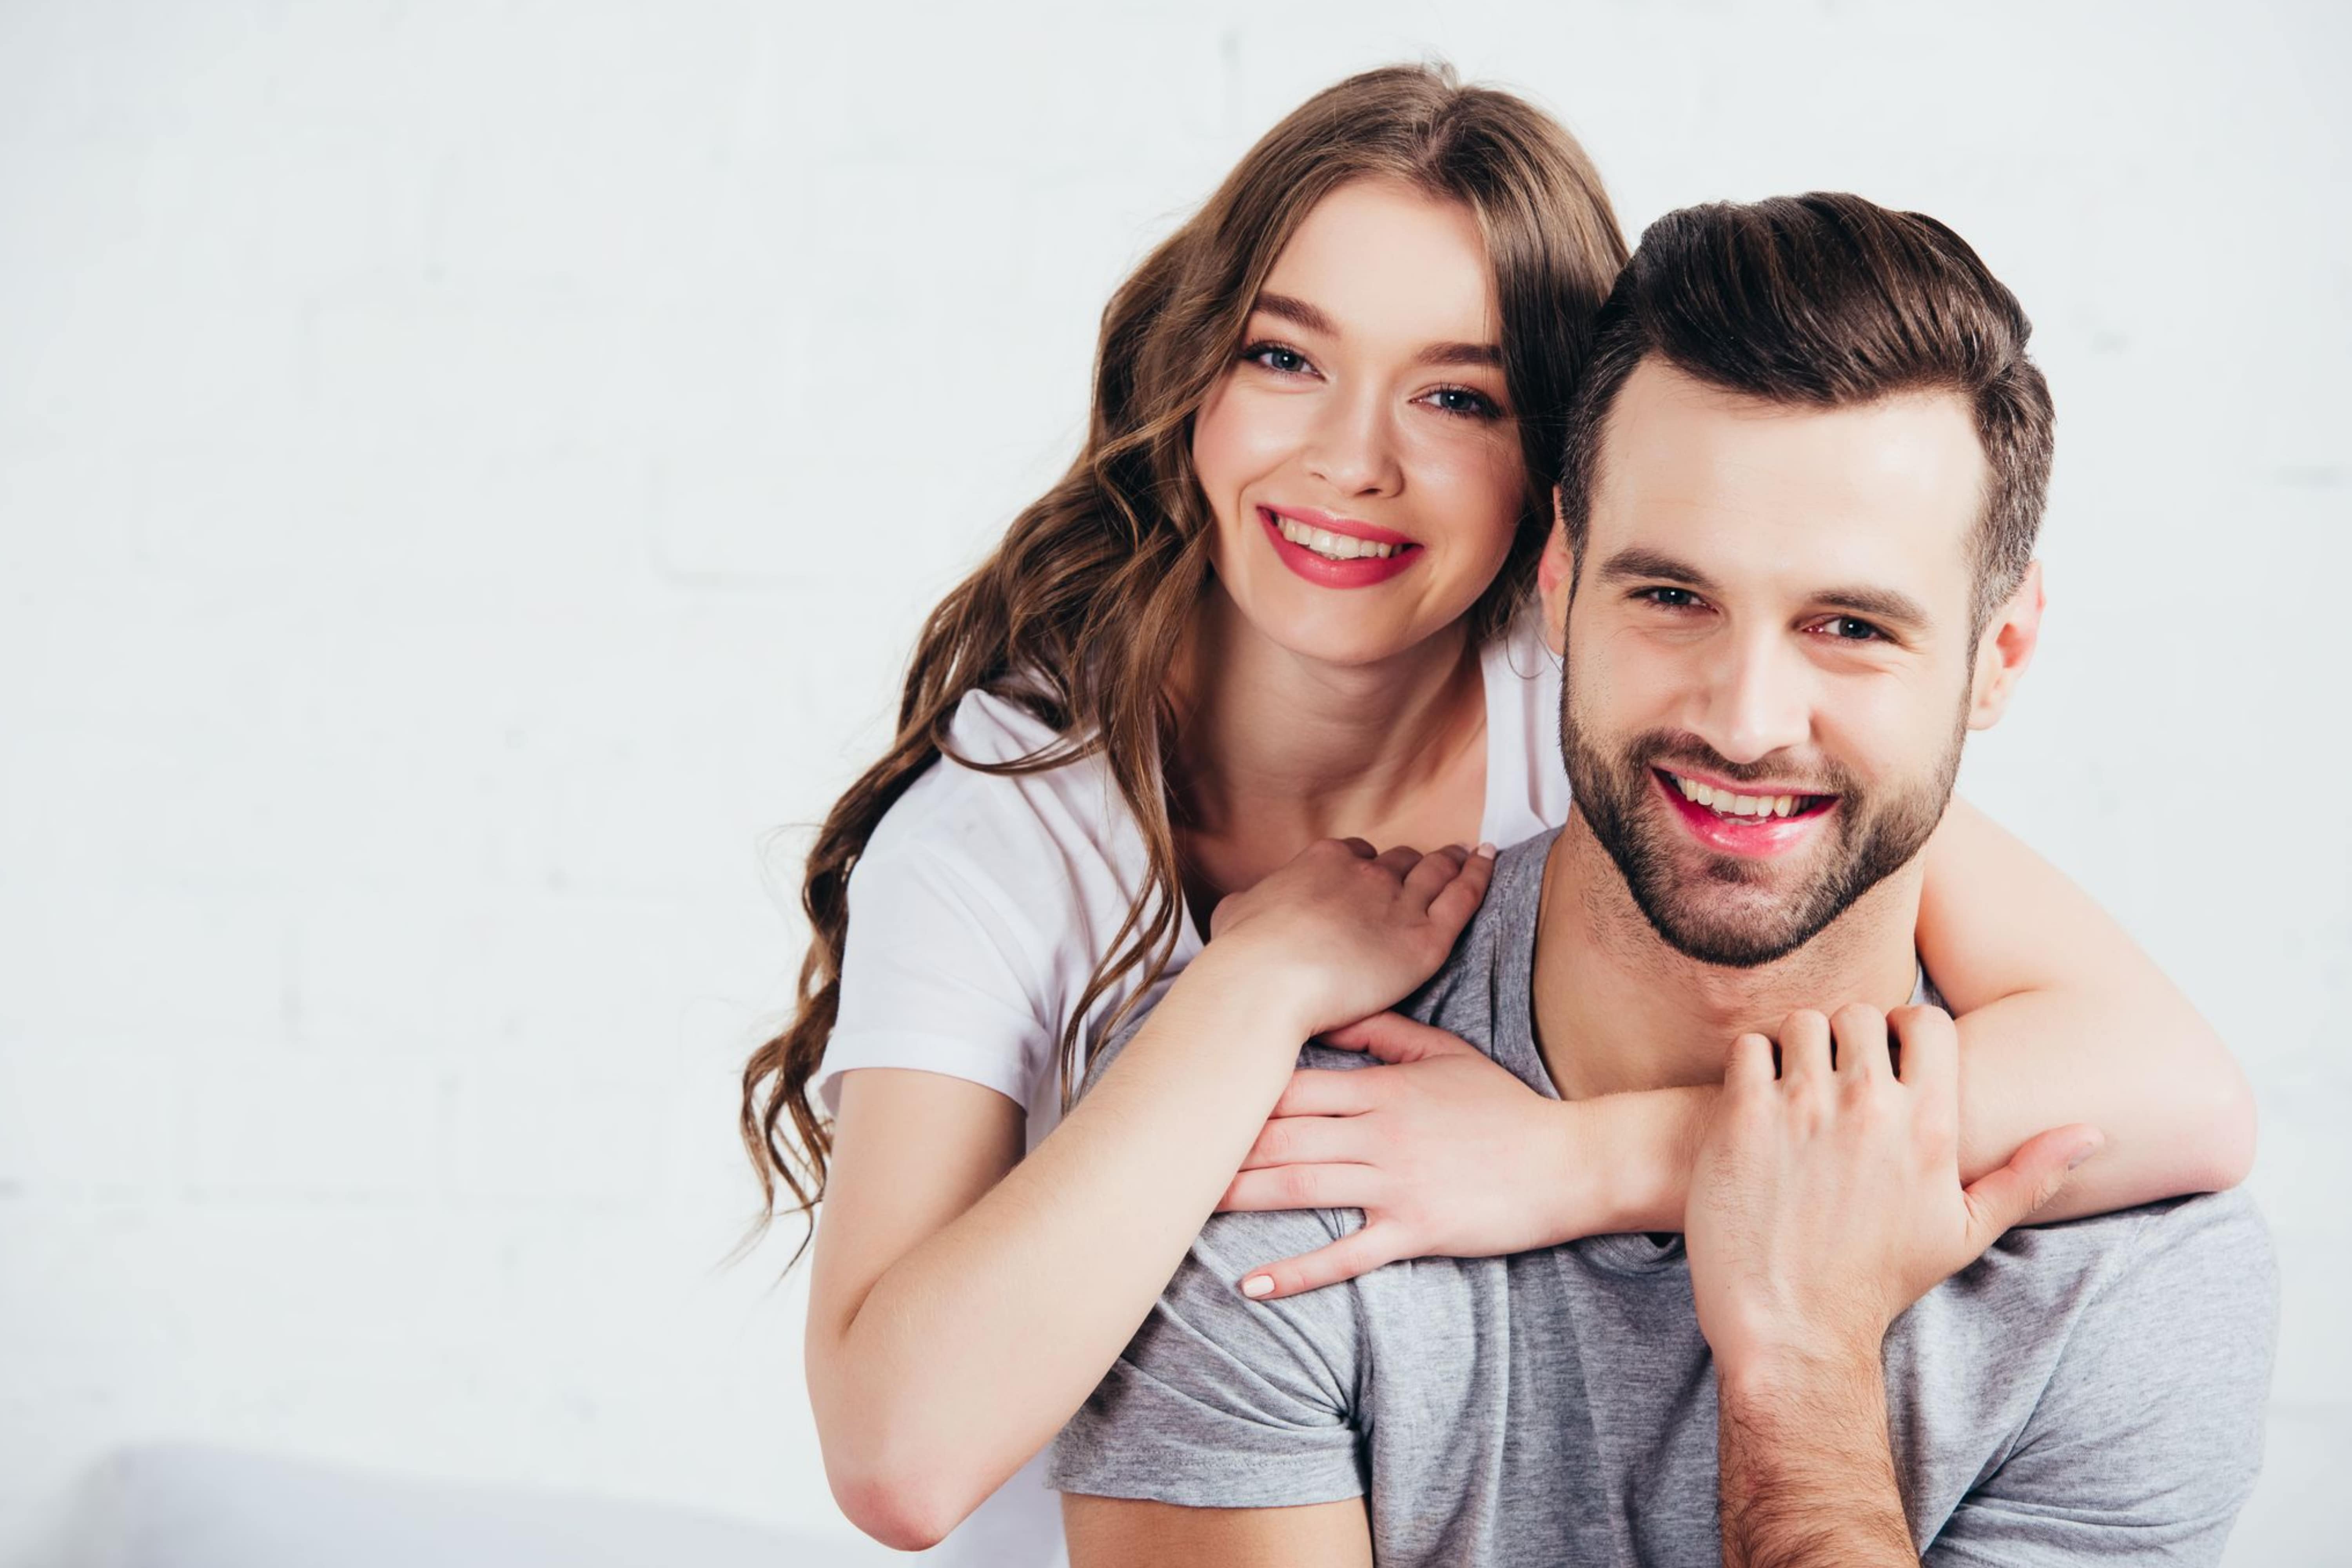 8 Traits of Emotionally Healthy Relationships